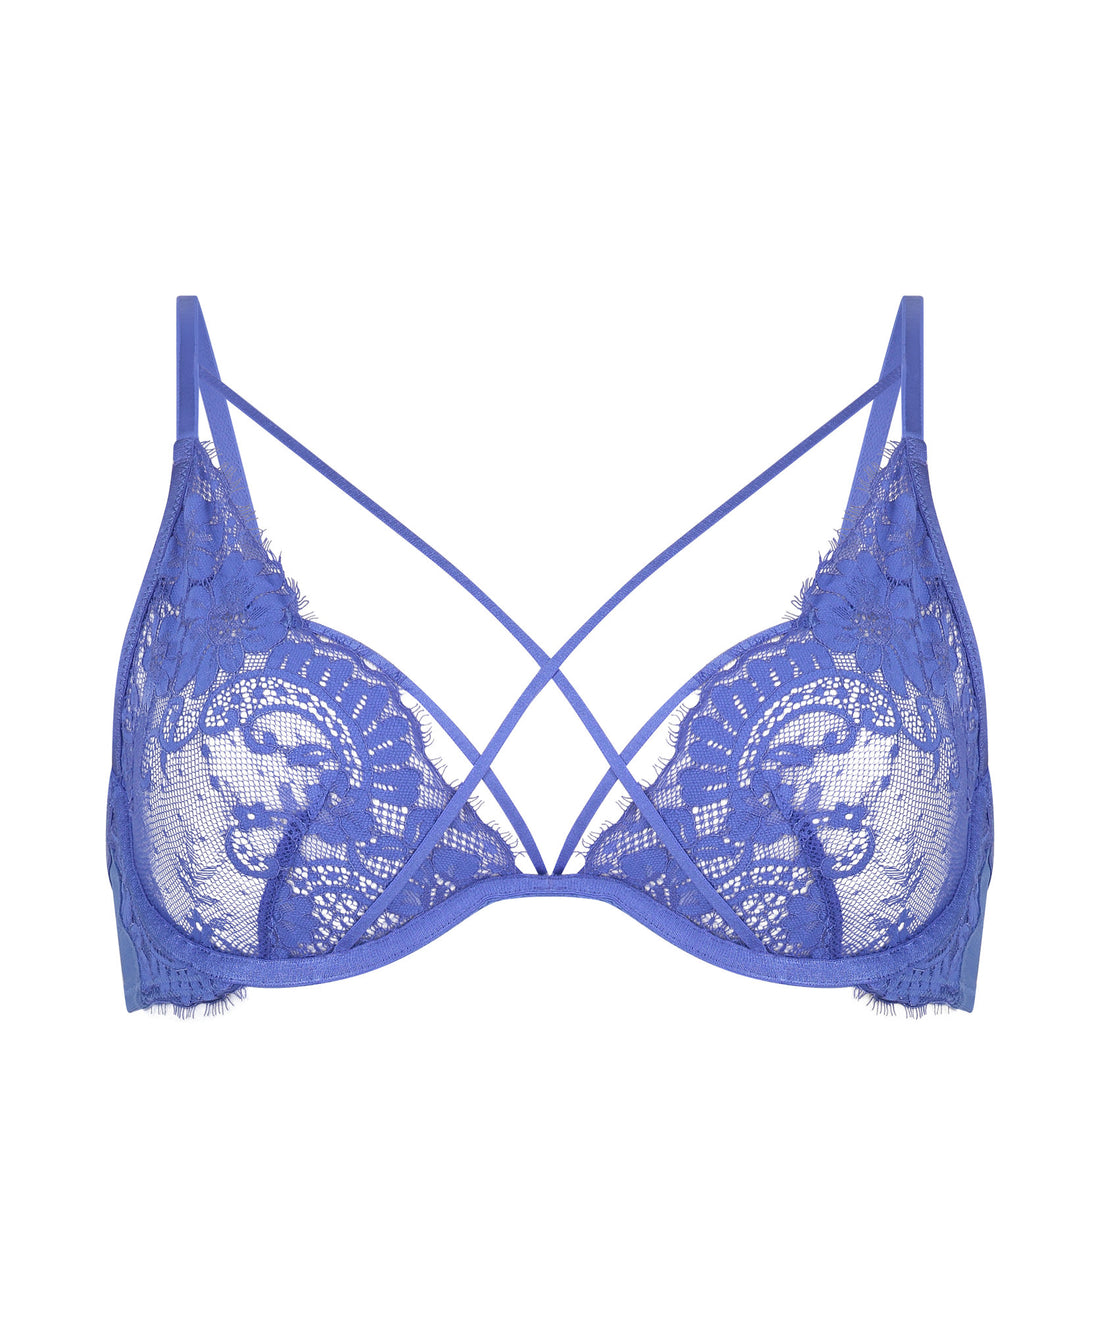 Lidia Up In Different Cup Sizes_201171_Amparo Blue_01